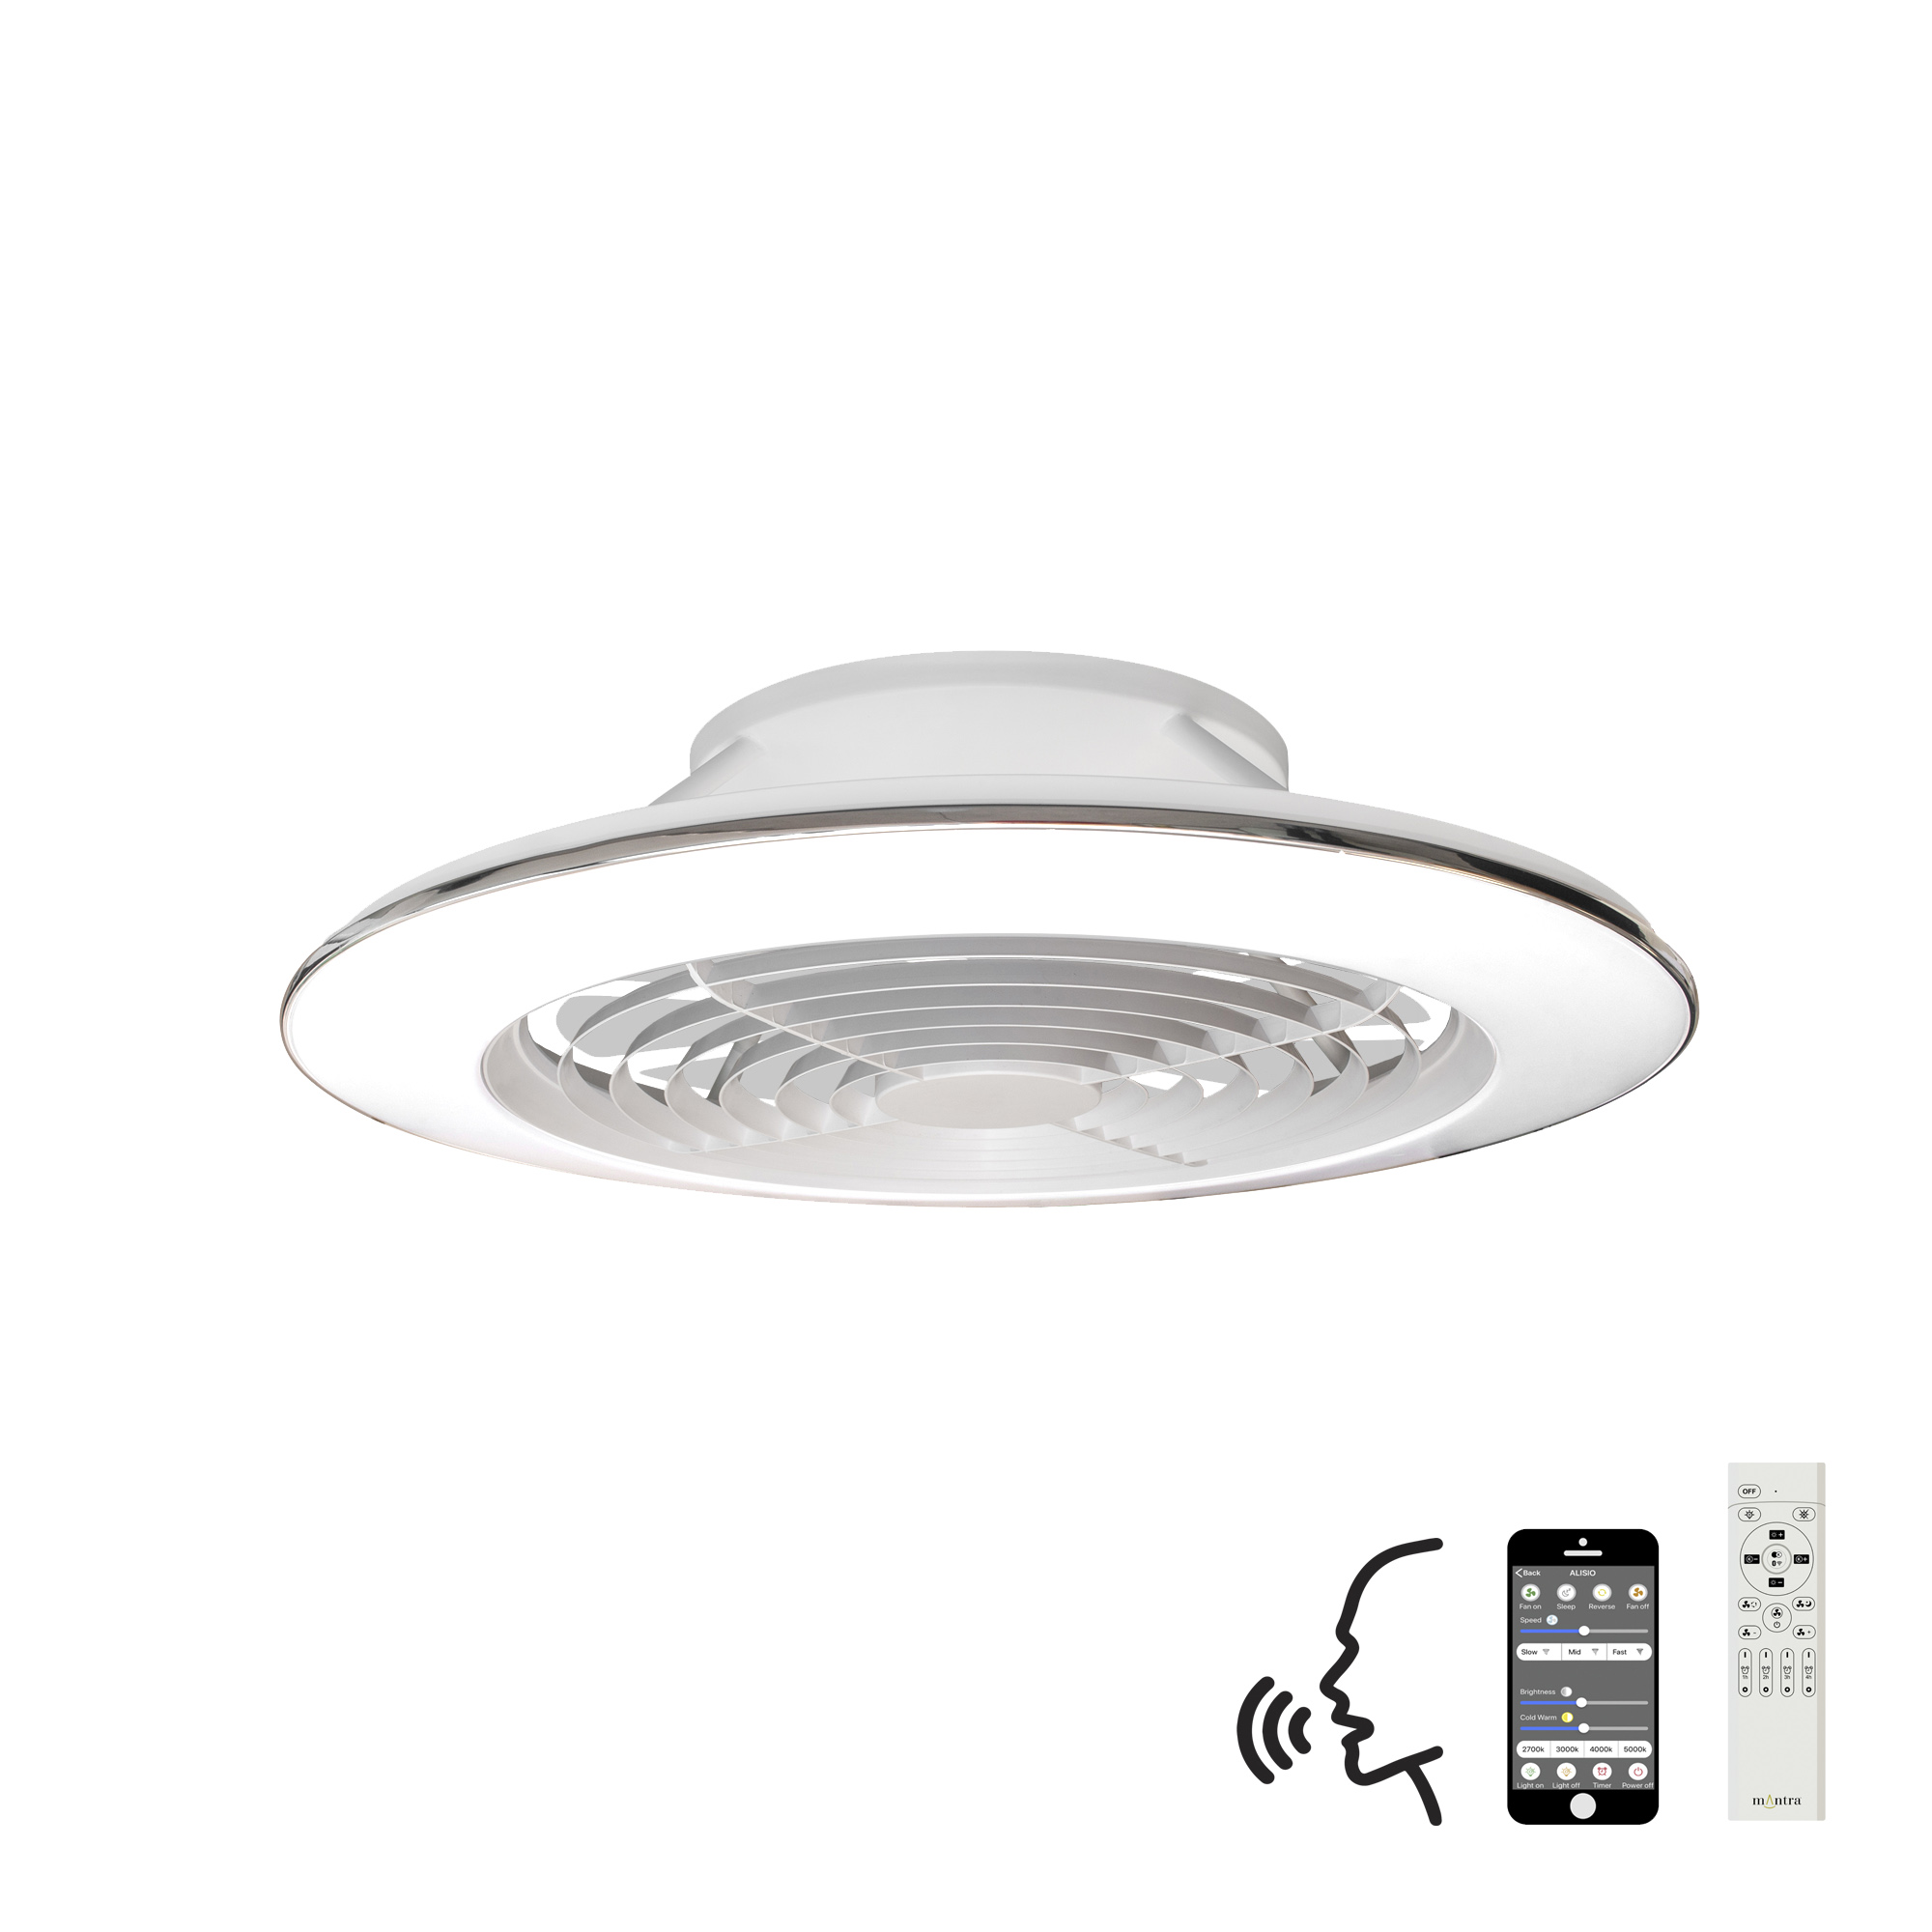 M7490  Alisio XL 95W LED Dimmable Ceiling Light & Fan, Remote / APP / Voice Controlled White